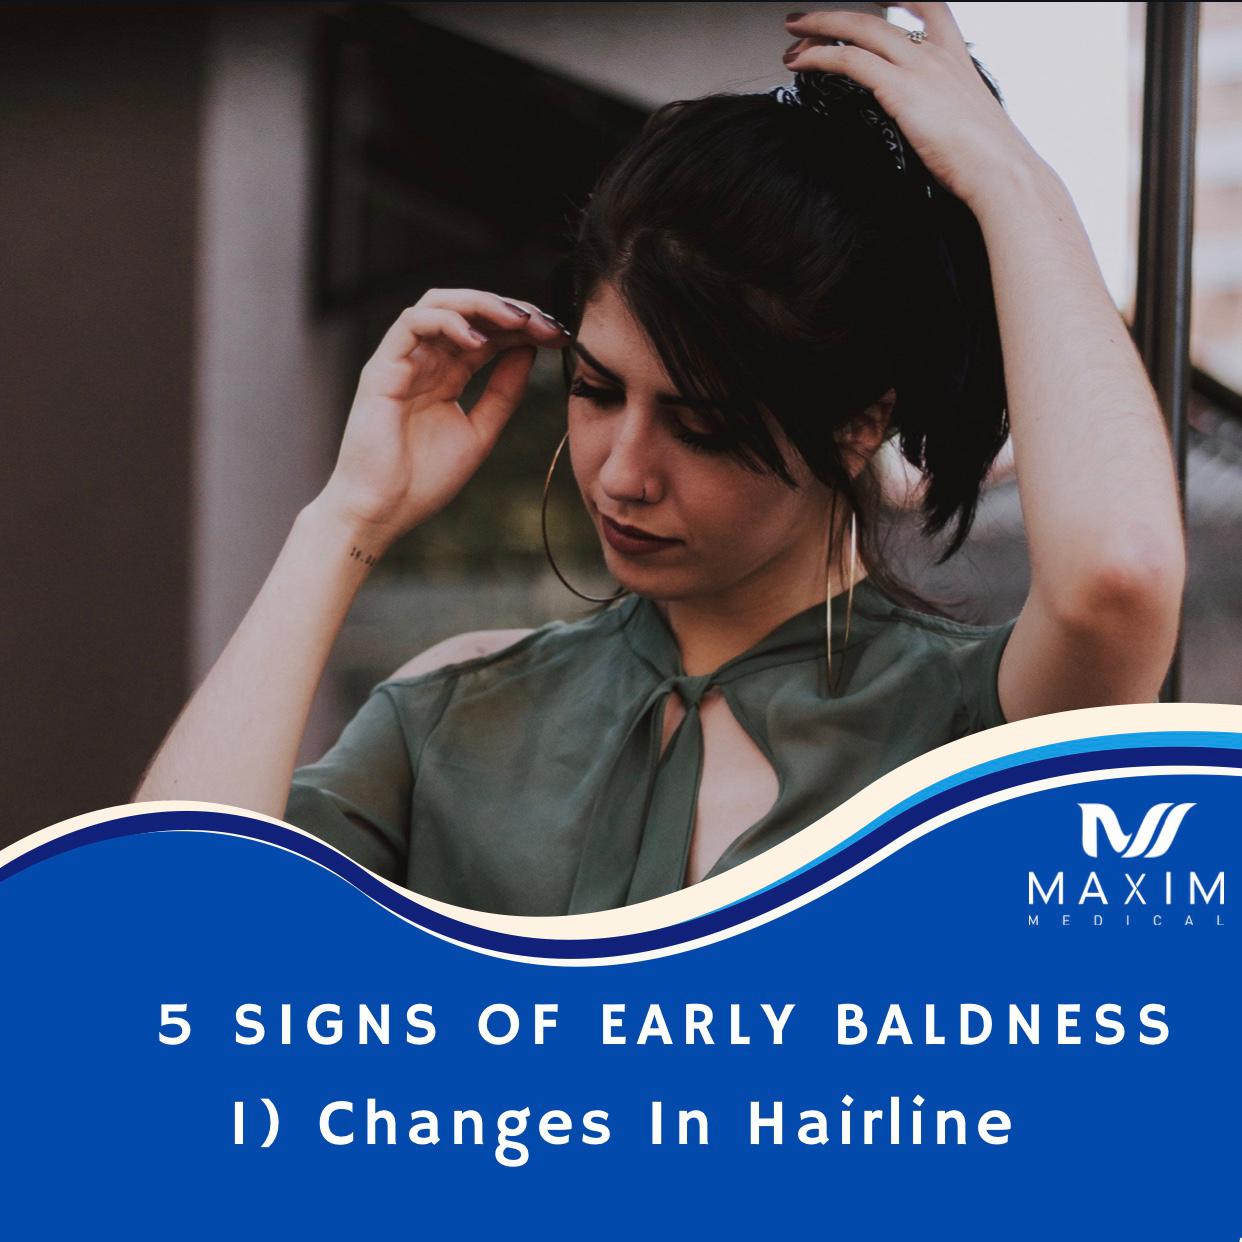 5 Early Signs Of Baldness

1. Changes In Hairline
One of the main early signs of incoming baldness is a change in your hairline. Though it is not a 100% guarantee for baldness, it is still a common sign of it. For the most part, the change in their hairline for men is seen in the receding frontal hairline, specifically the corners. The result of this corner recession usually ends up being what is known as a widow’s peak.